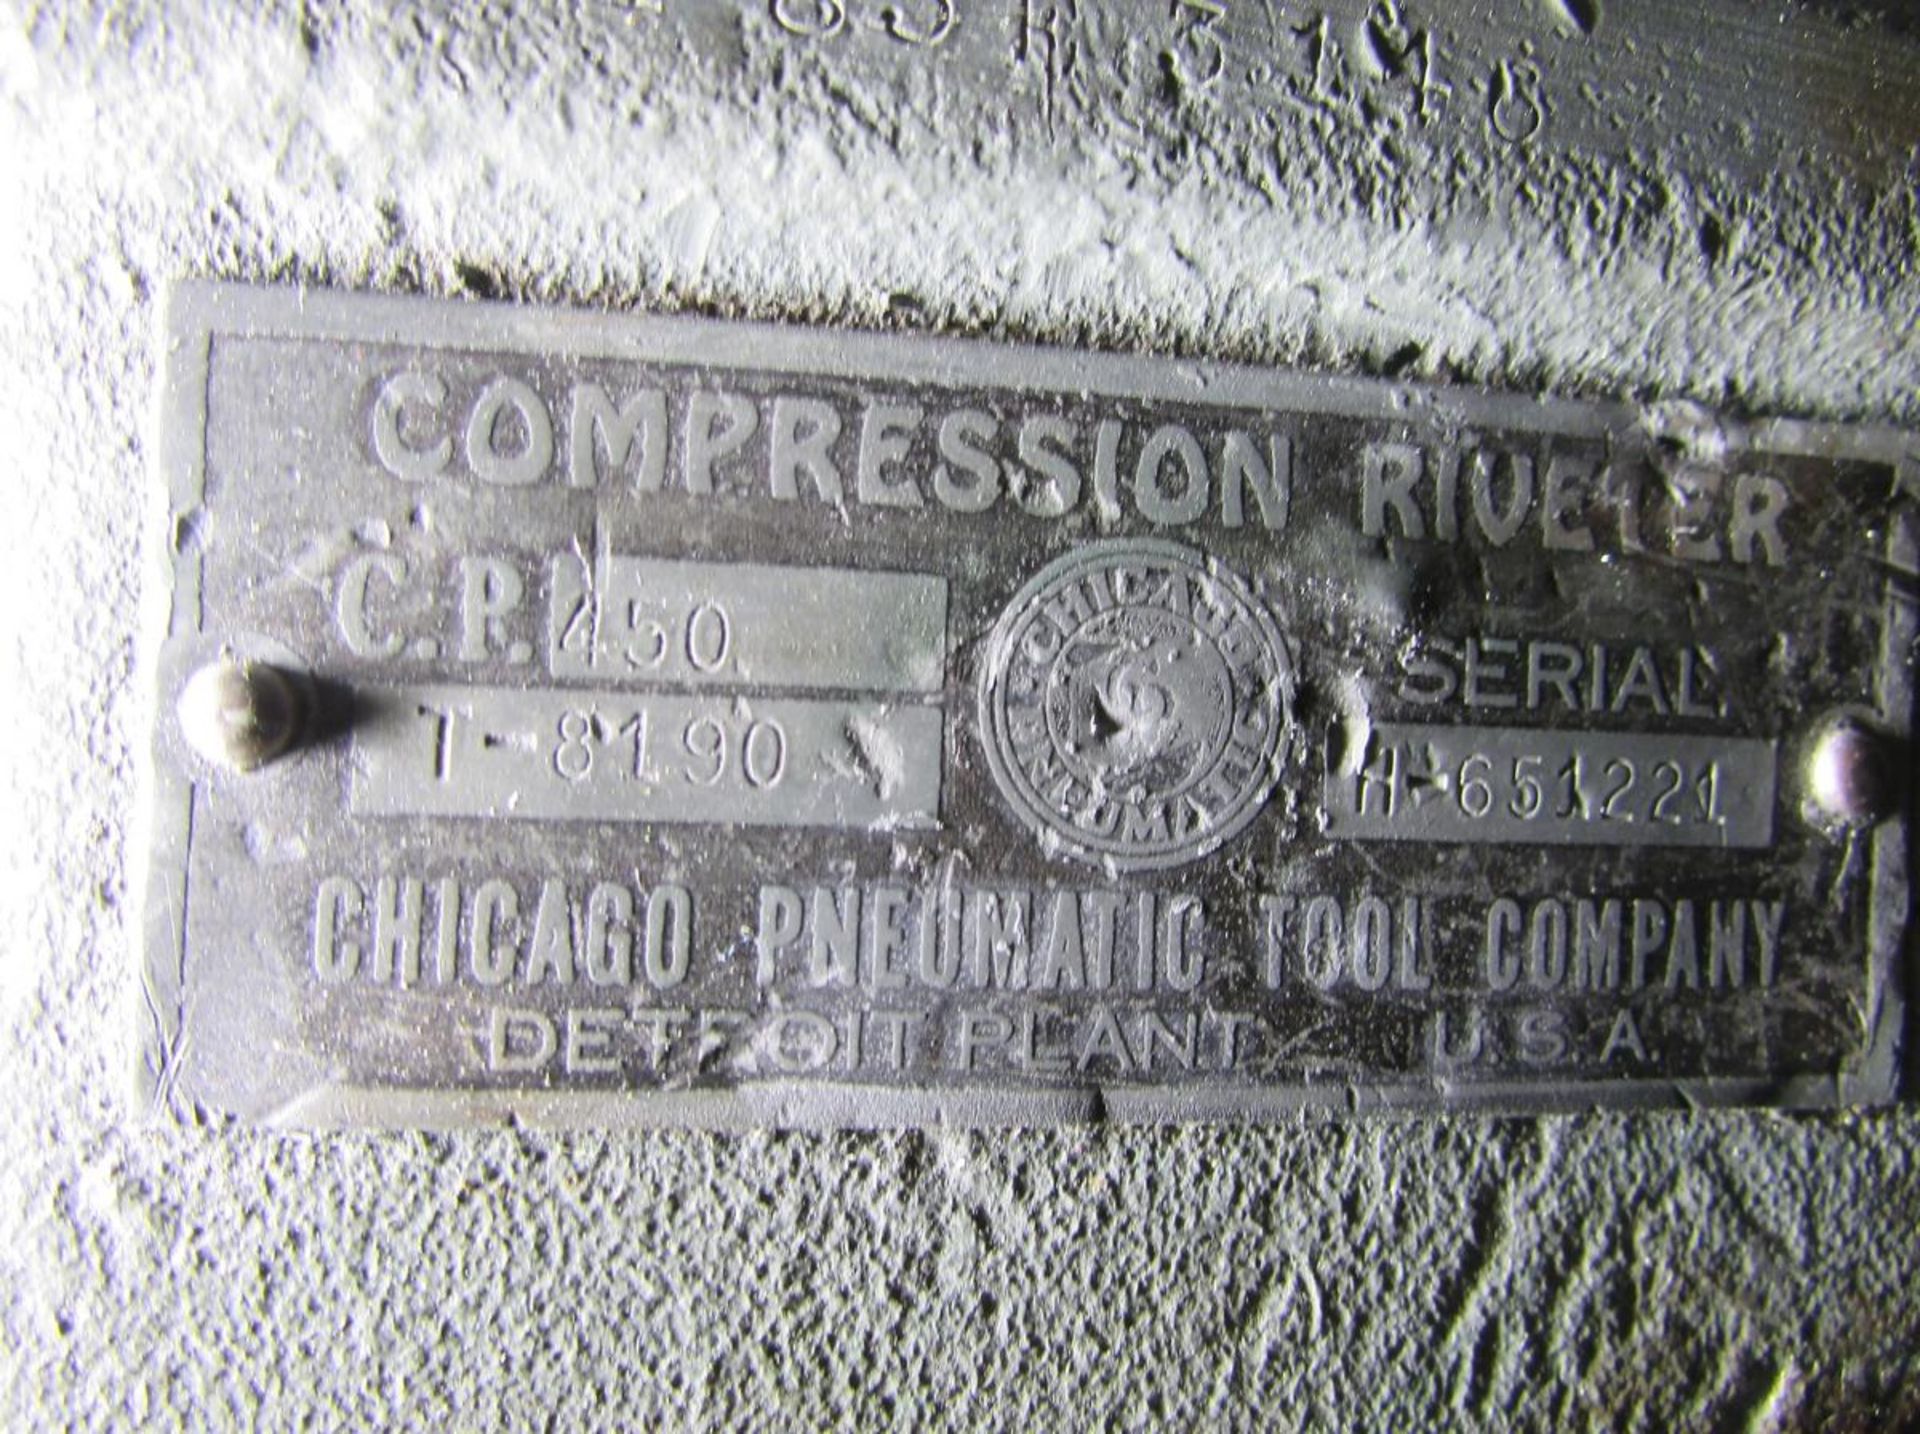 Chicago Pneumatic CP-450 Compression Riveter - Image 9 of 9